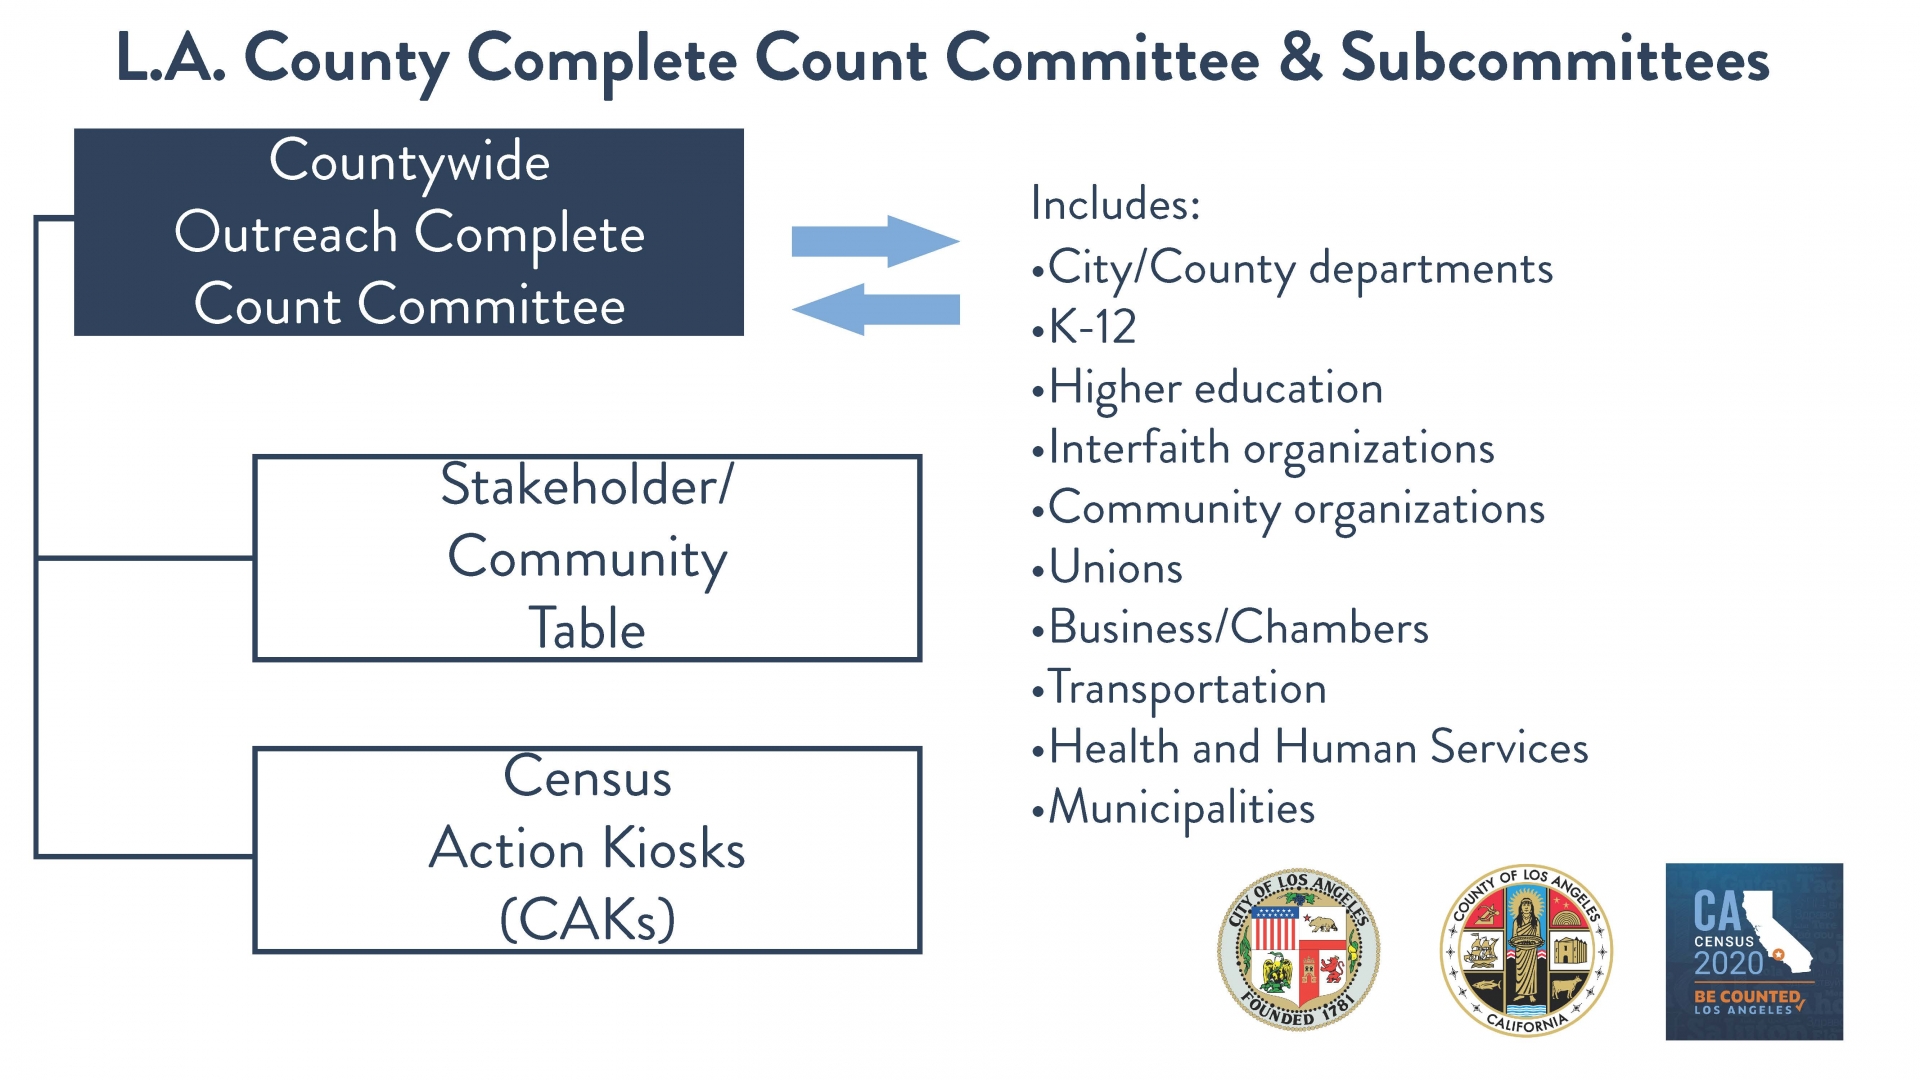 Complete Count Committee organizational chart, click here for accessible PDF version.